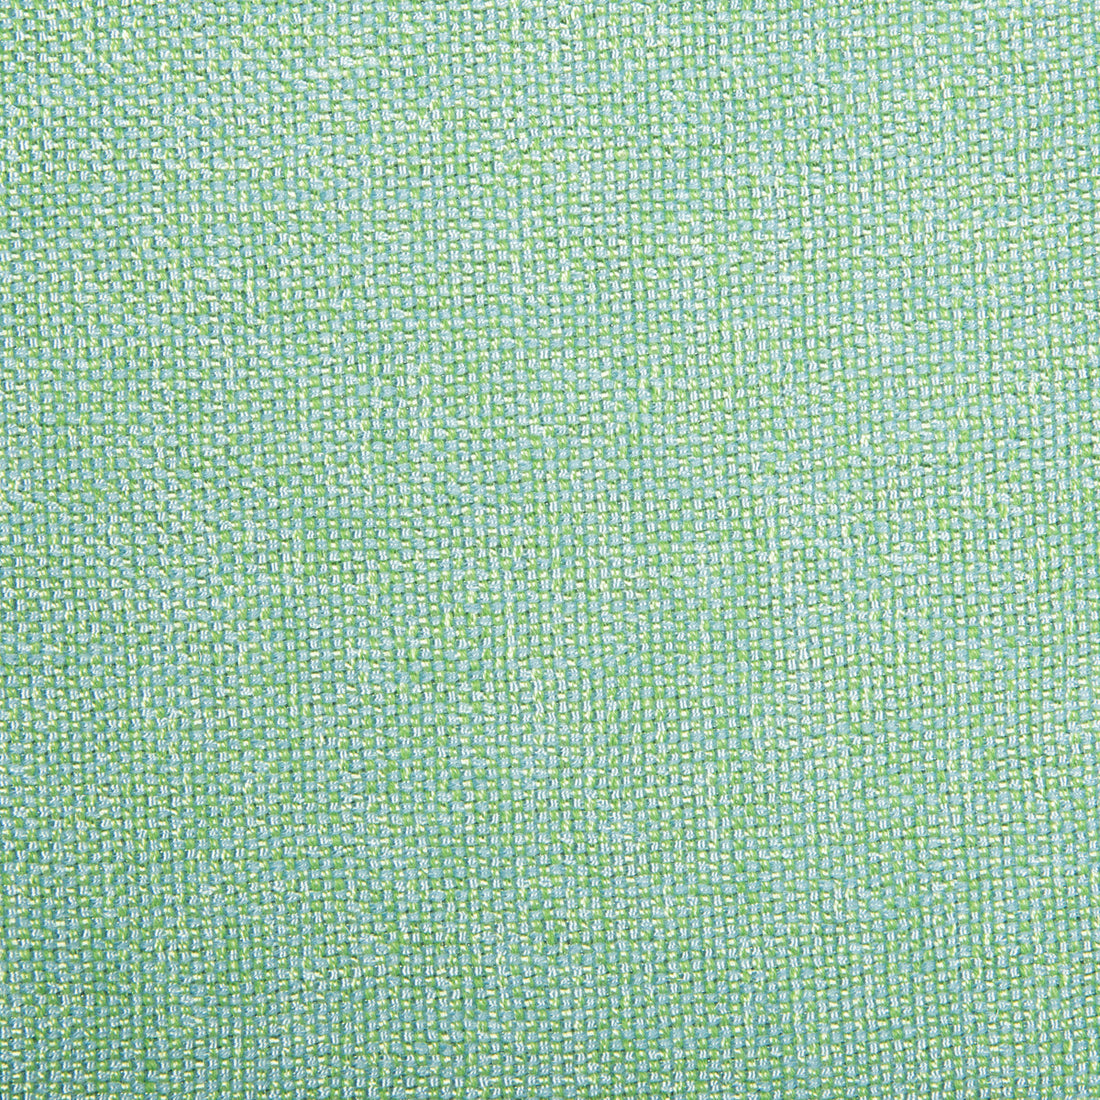 Kravet Contract fabric in 34926-1523 color - pattern 34926.1523.0 - by Kravet Contract